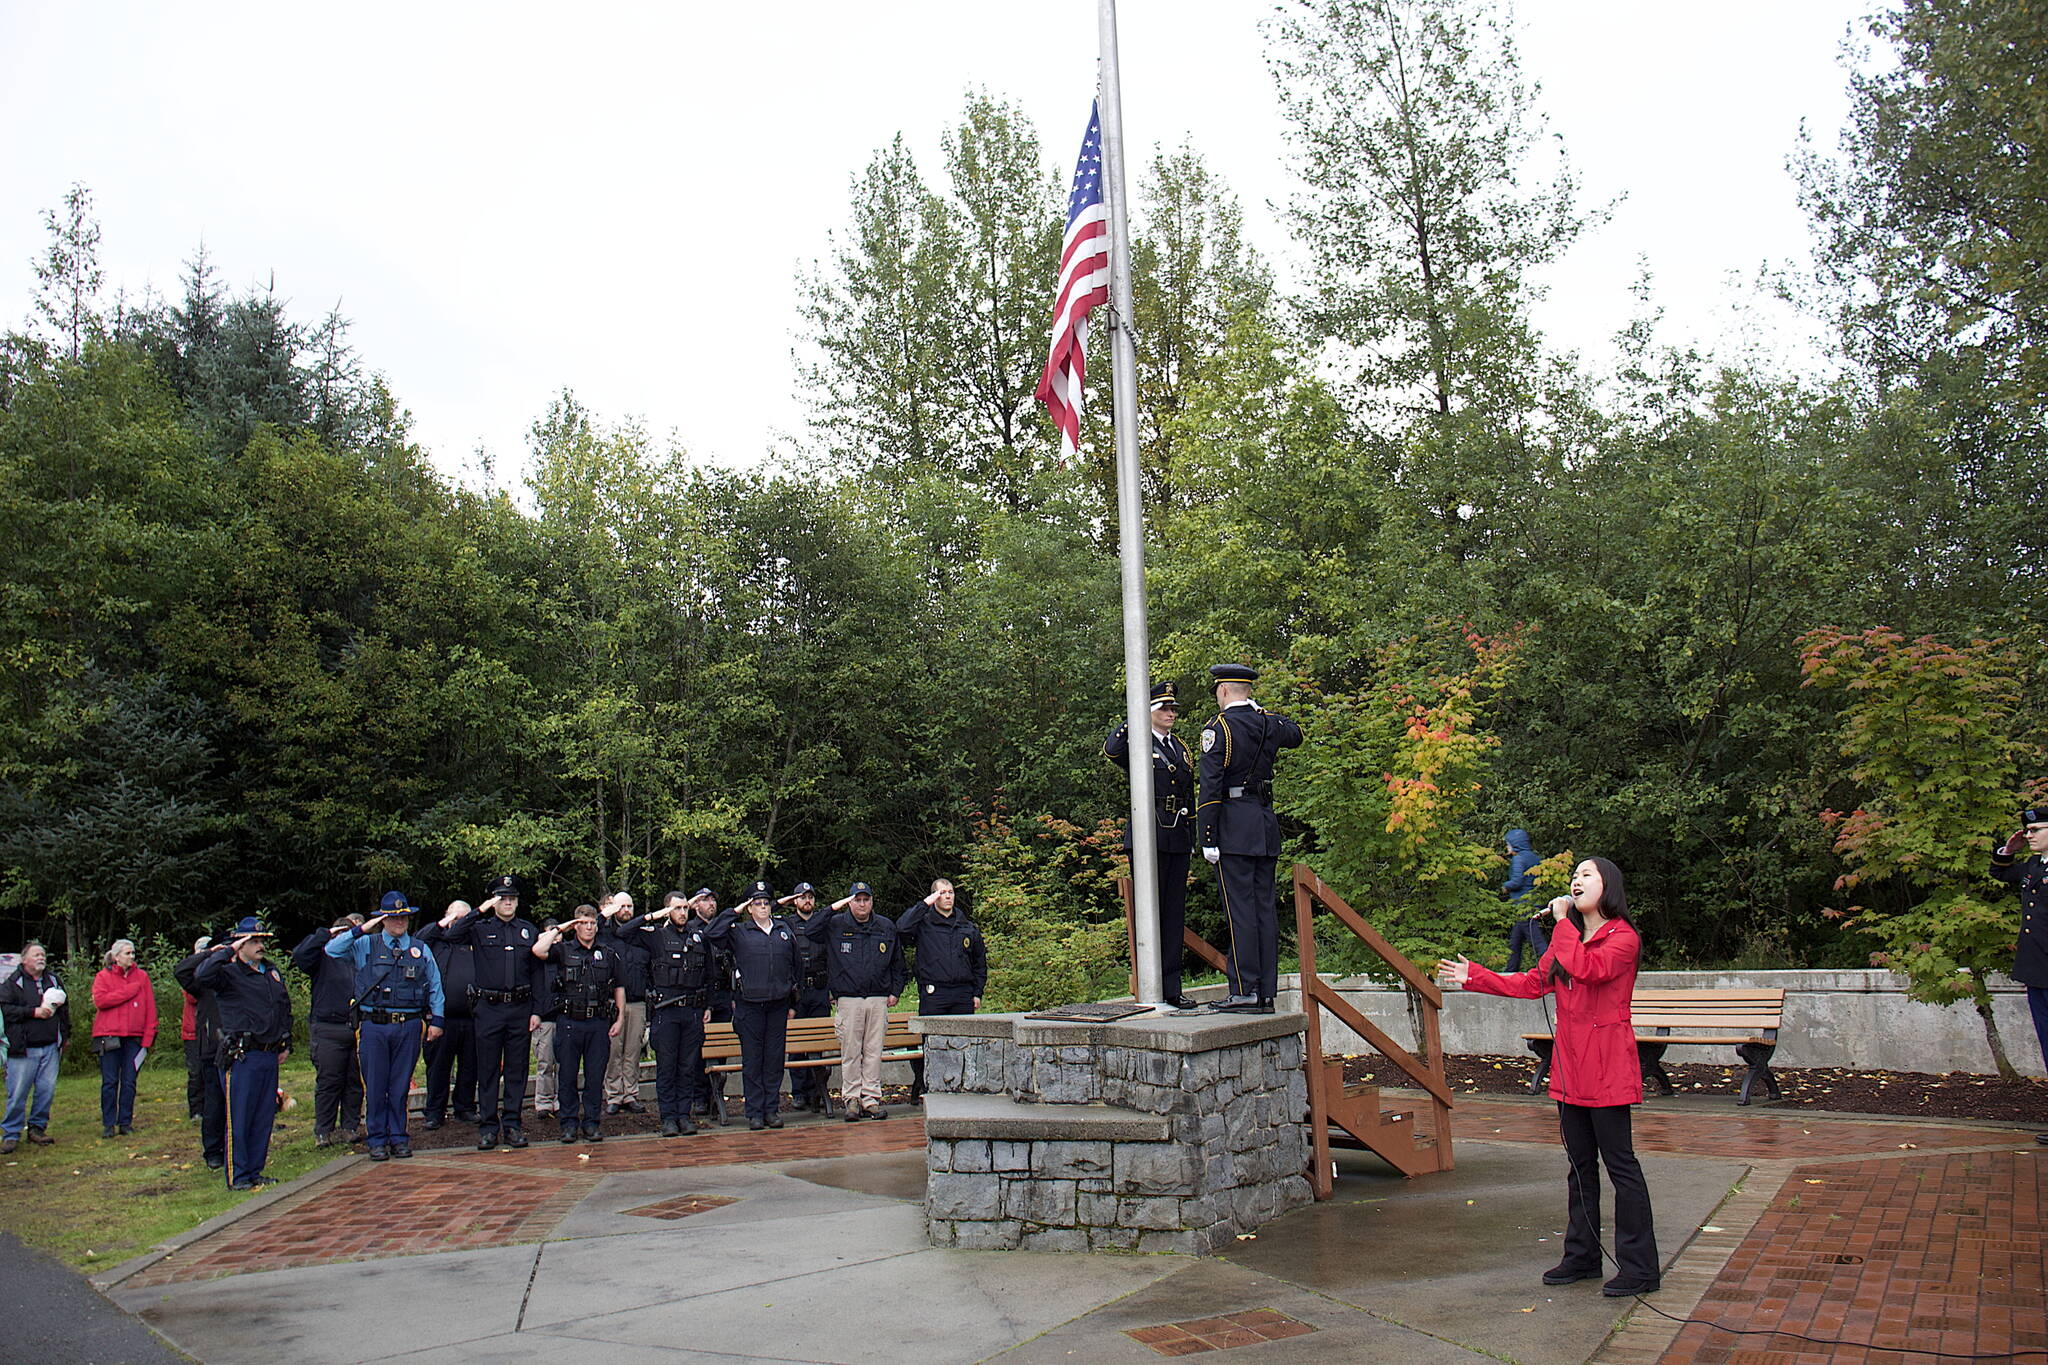 Elizabeth Djajalie sings the national anthem while Juneau Police Department officers and other stand at attention during a ceremony Monday at the September 11th Memorial at Riverside Rotary Park commemorating the terrorist attacks in 2001 that killed 2,996 people. About 100 local first responders, political leaders and other people attended the ceremony that featured the raising of the flag at half-mast at 9:58 a.m., the same time on the East Coast the first World Trade Center collapsed on the day of the attack. (Mark Sabbatini / Juneau Empire)